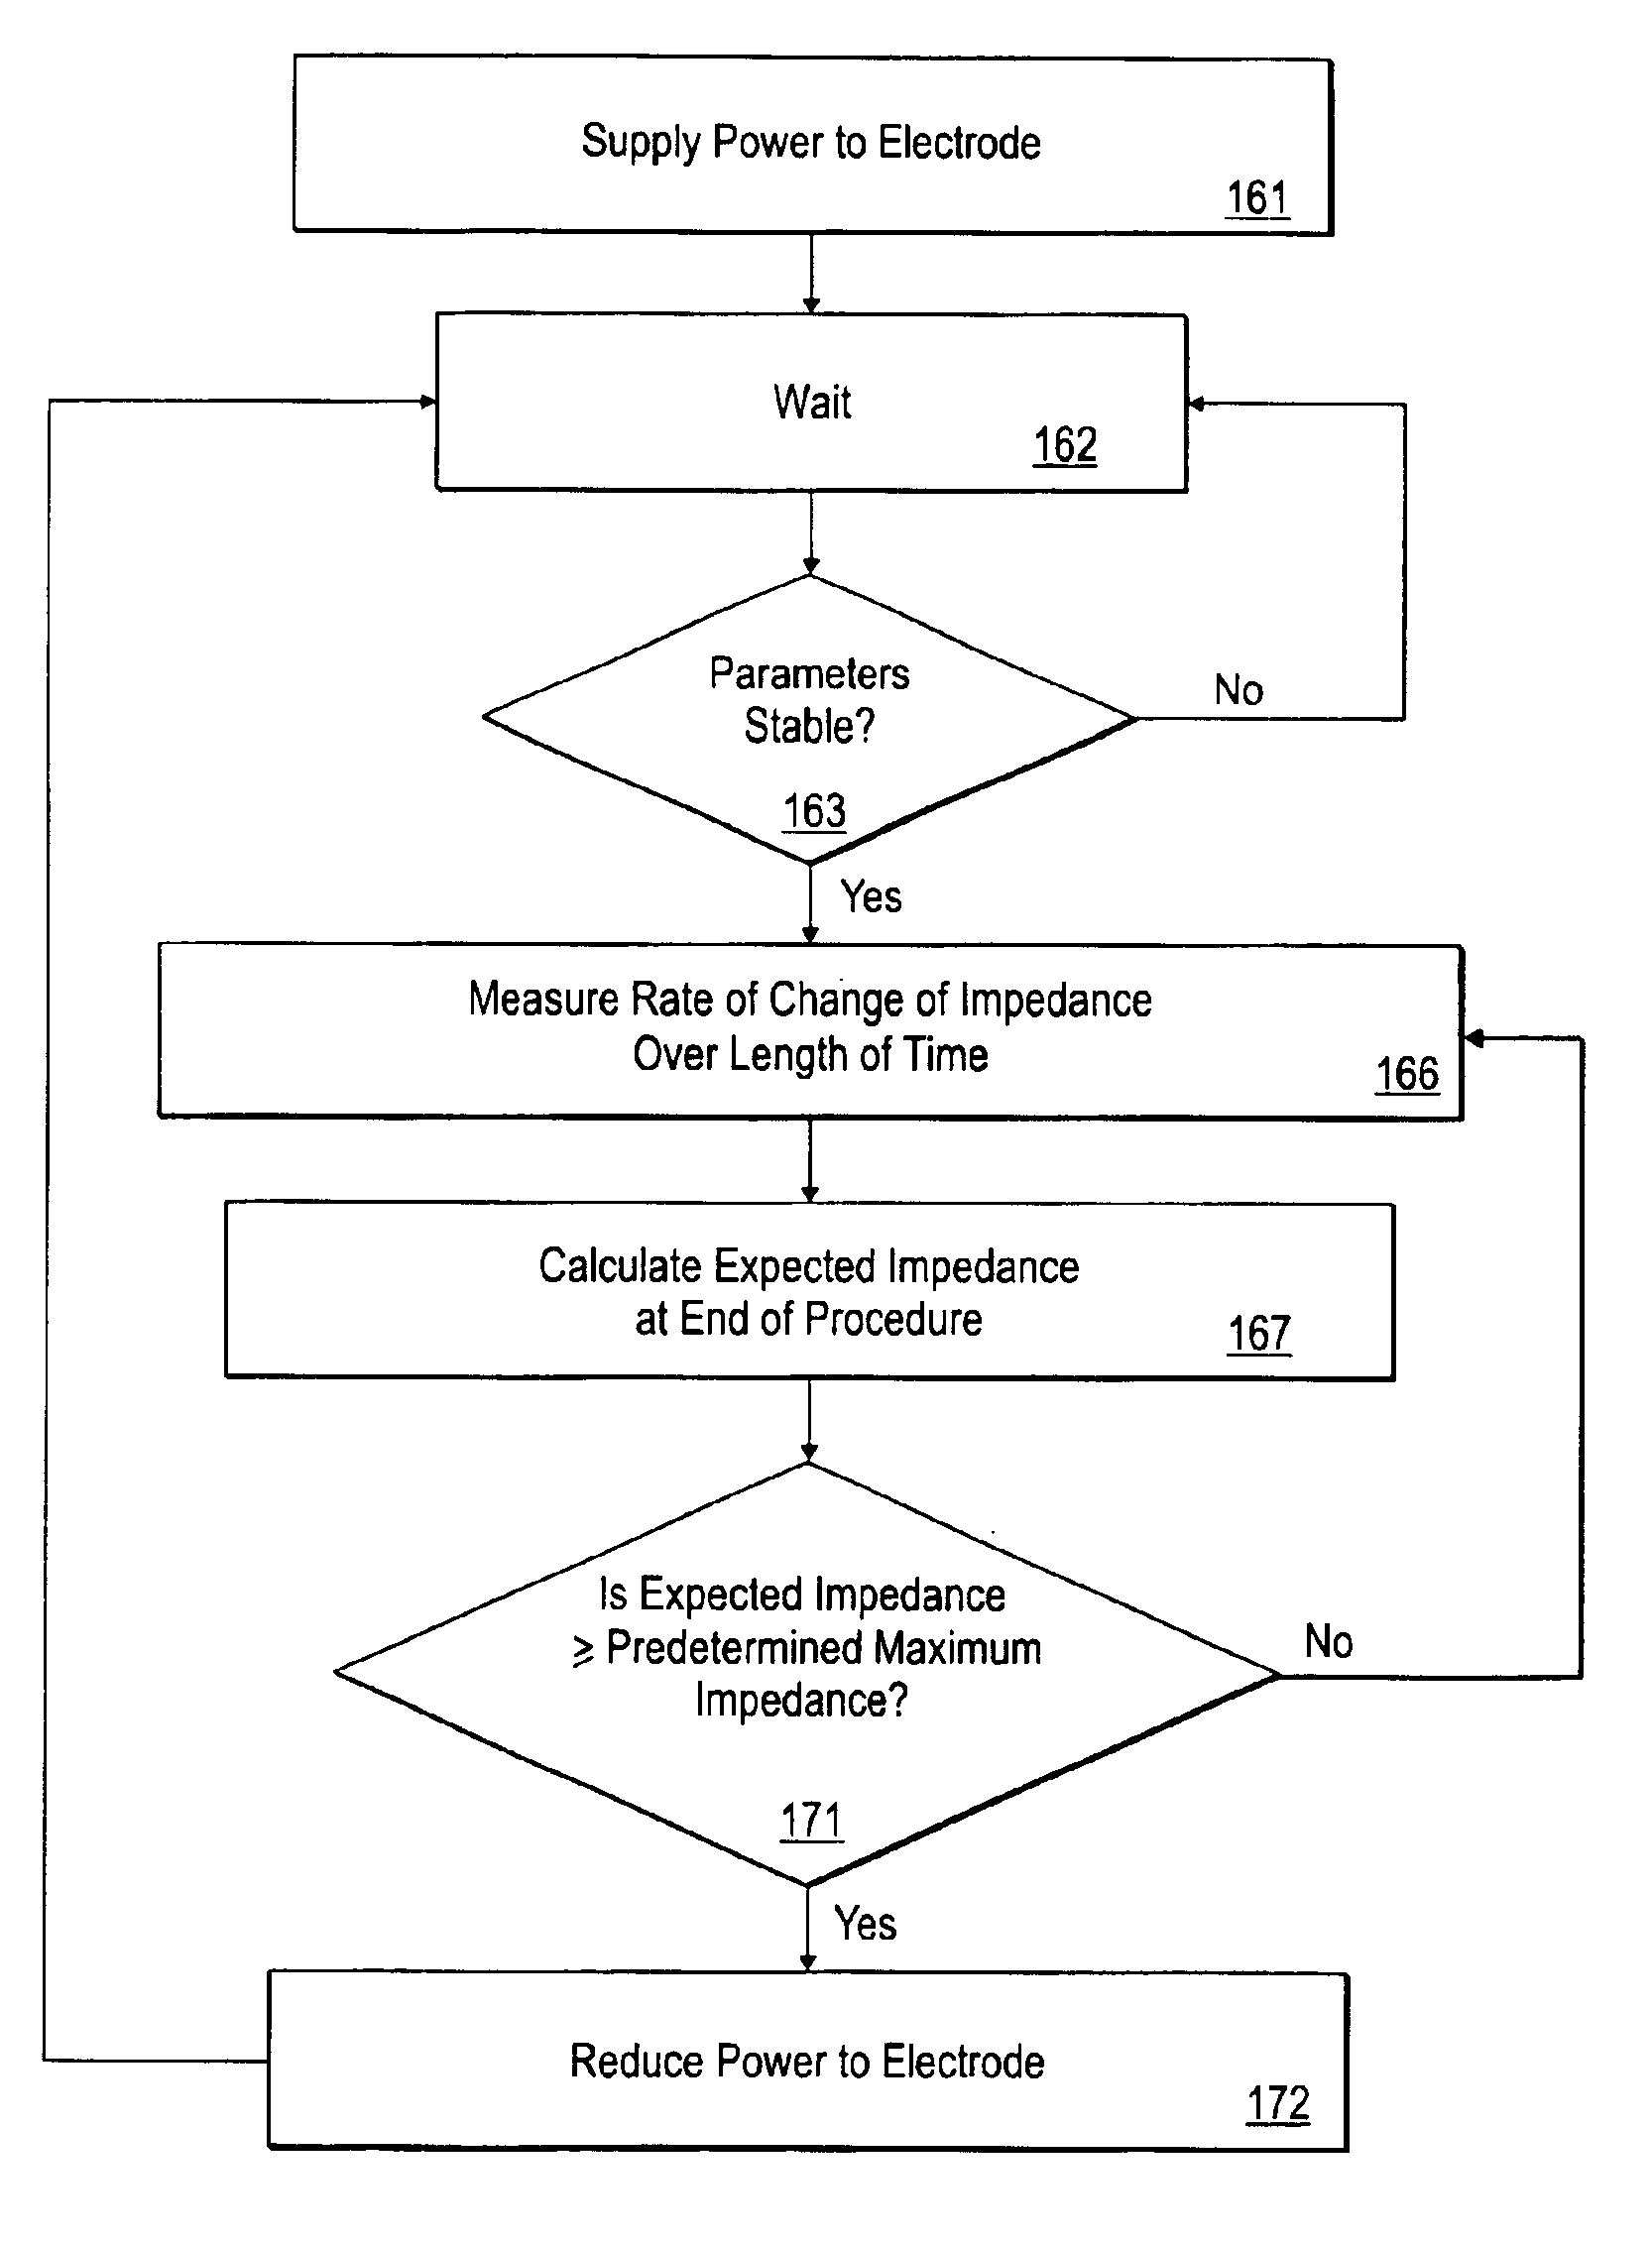 Method for monitoring impedance to control power and apparatus utilizing same